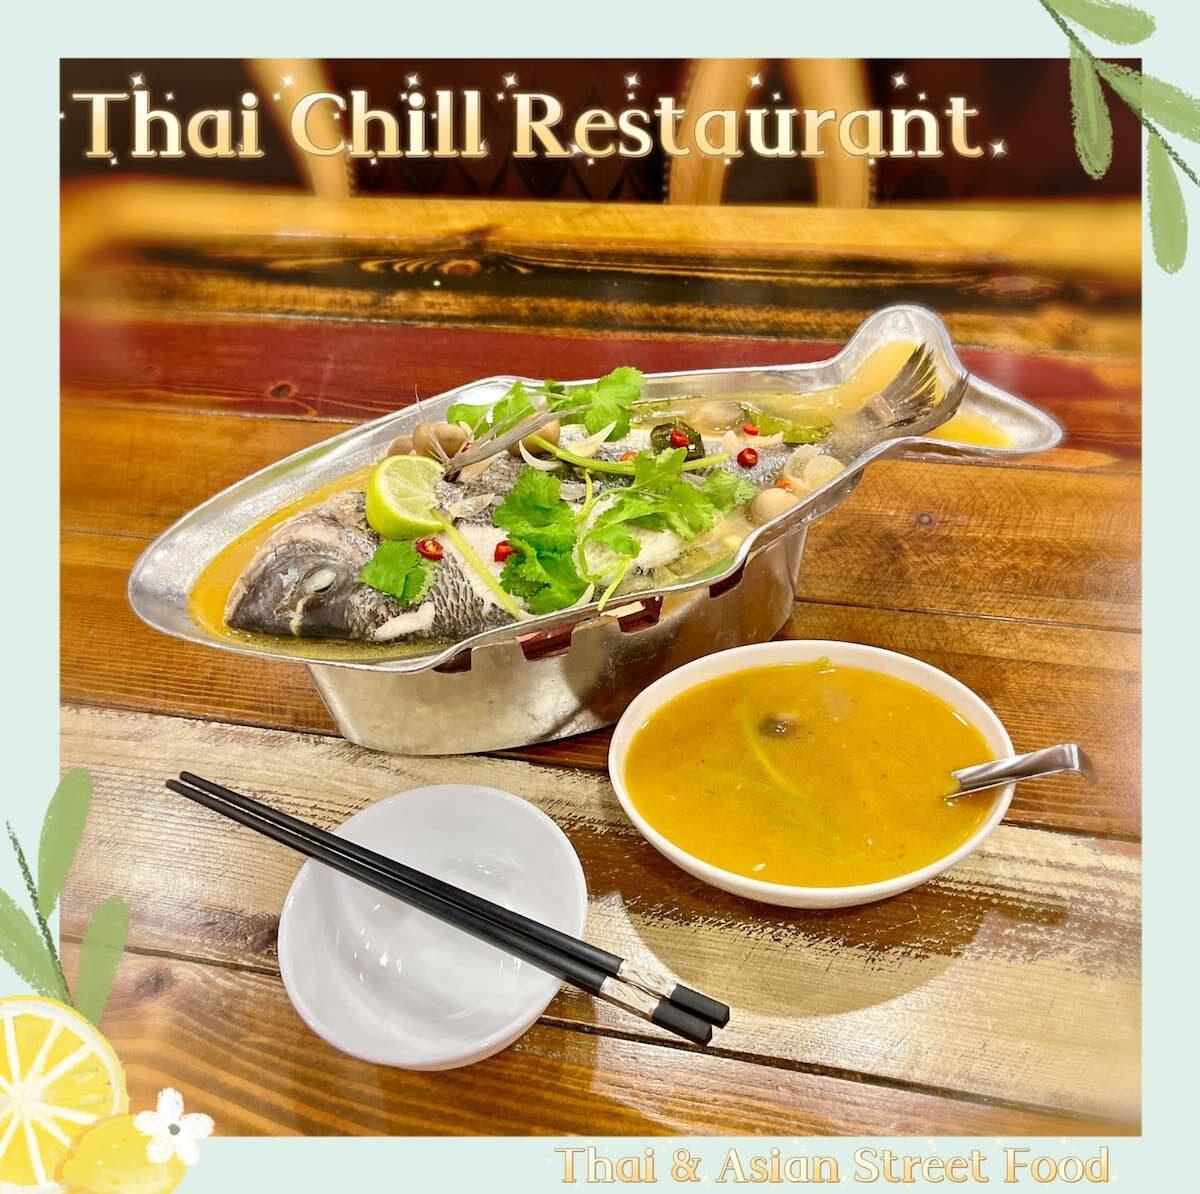 The Thai-style steamed fish with lemon is presented as a whole. Traditionally in many Asian cultures, a steamed fish is made and served as a whole to highlight its freshness. (Courtesy of Gordon Lam)